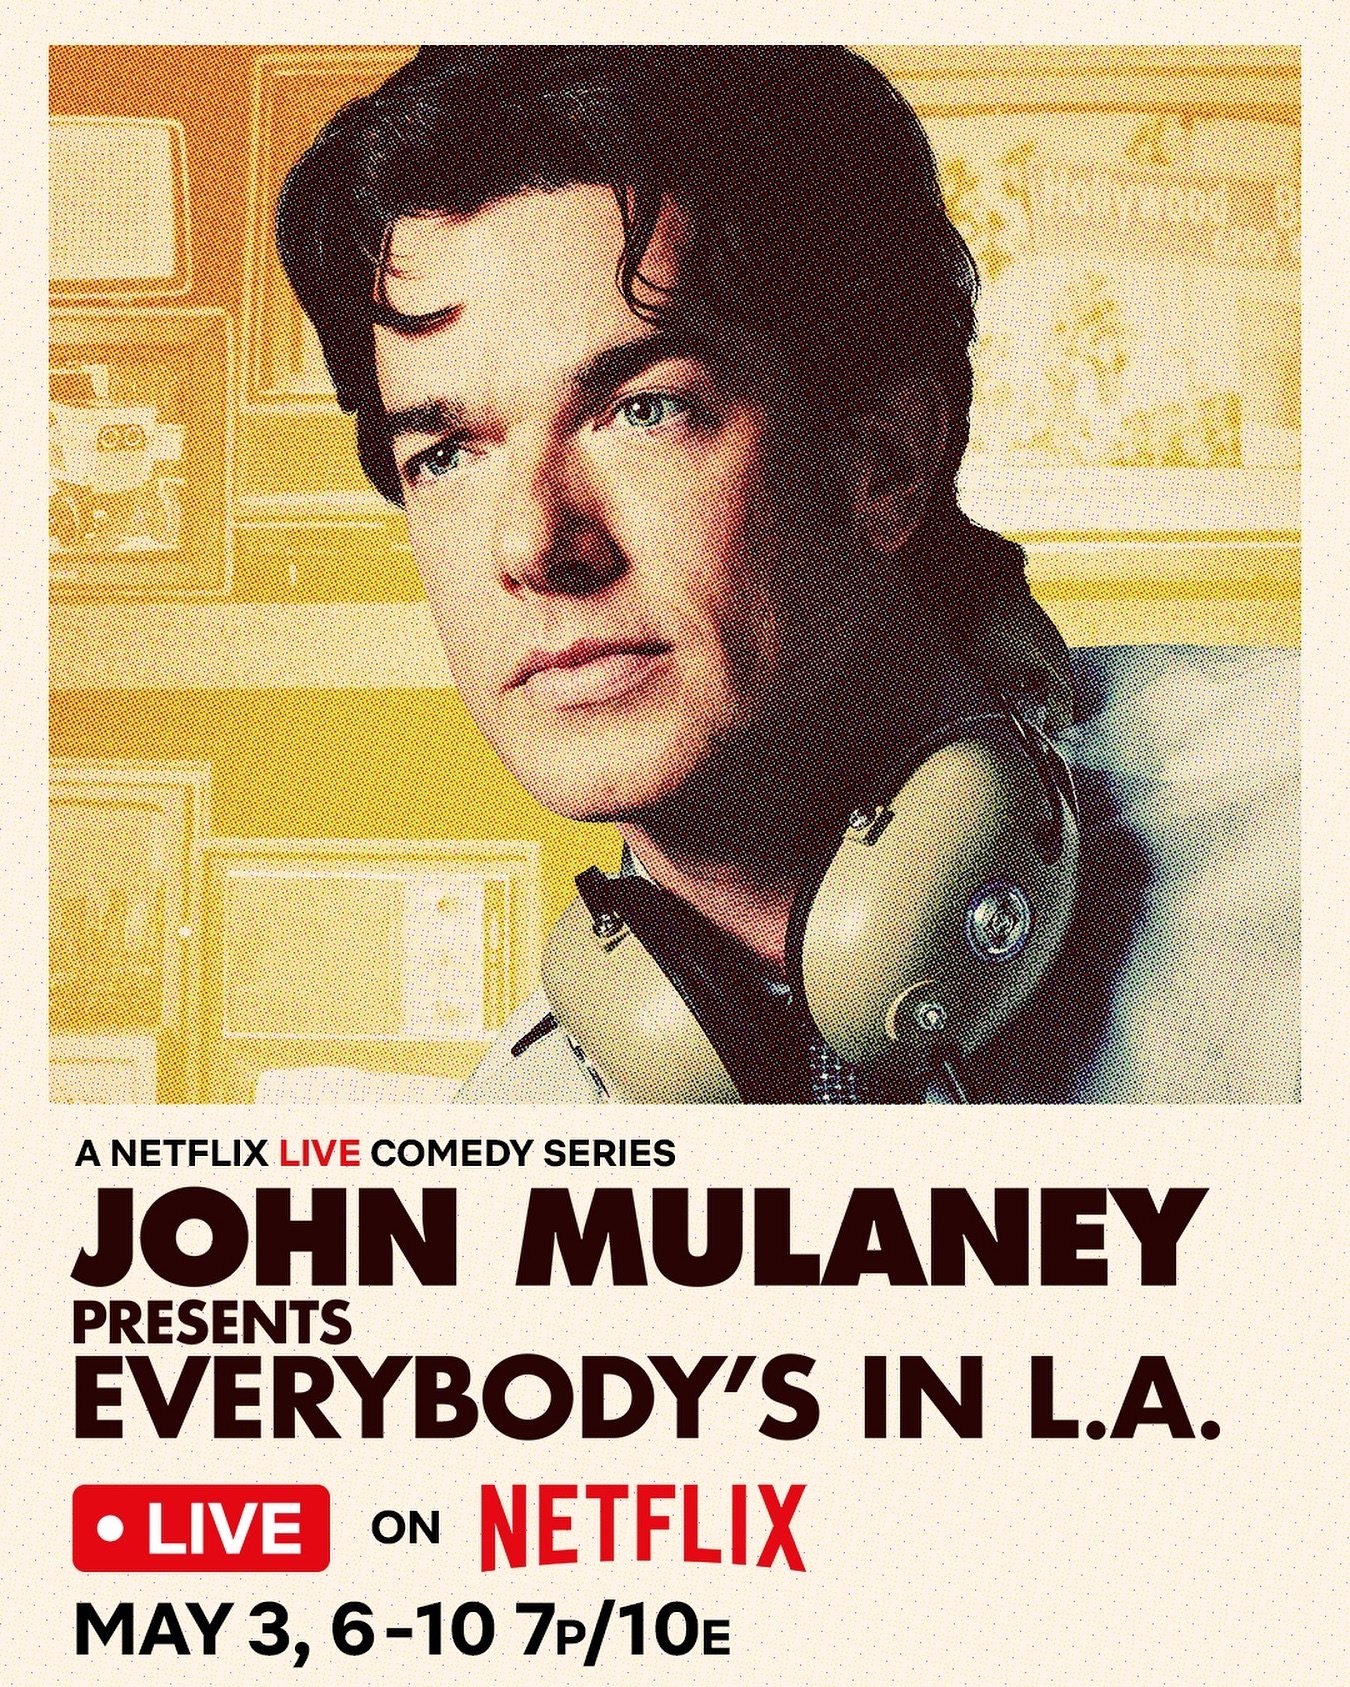 @johnmulaney is teaming up with @netflixisajoke to present &ldquo;Everybody&rsquo;s In LA,&rdquo; a live comedy series only on @netflix! The live shows will debut on May 3rd and then from May 6th to the 10th. #JohnMulaney ☀️🎤